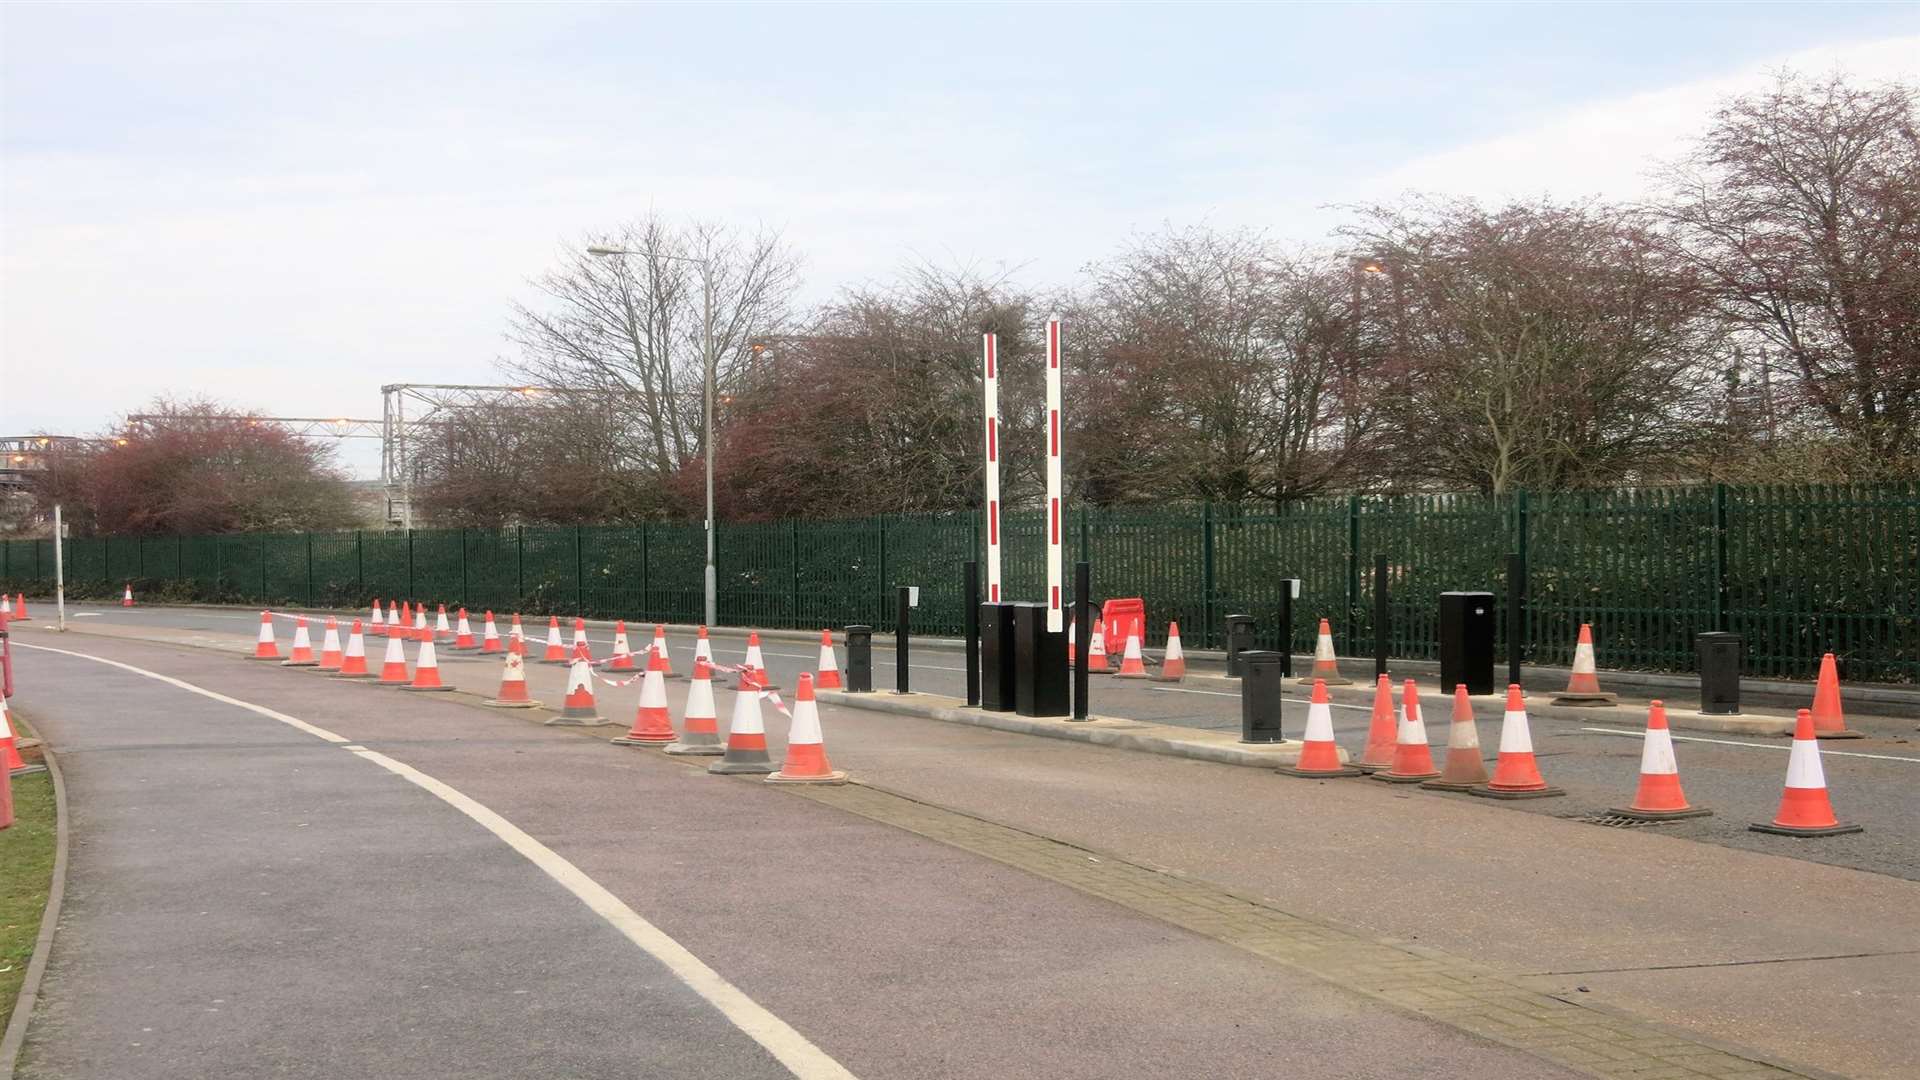 The new barriers at Ashford International station on the International side near to the Designer Outlet. Credit: Robert Kilkie